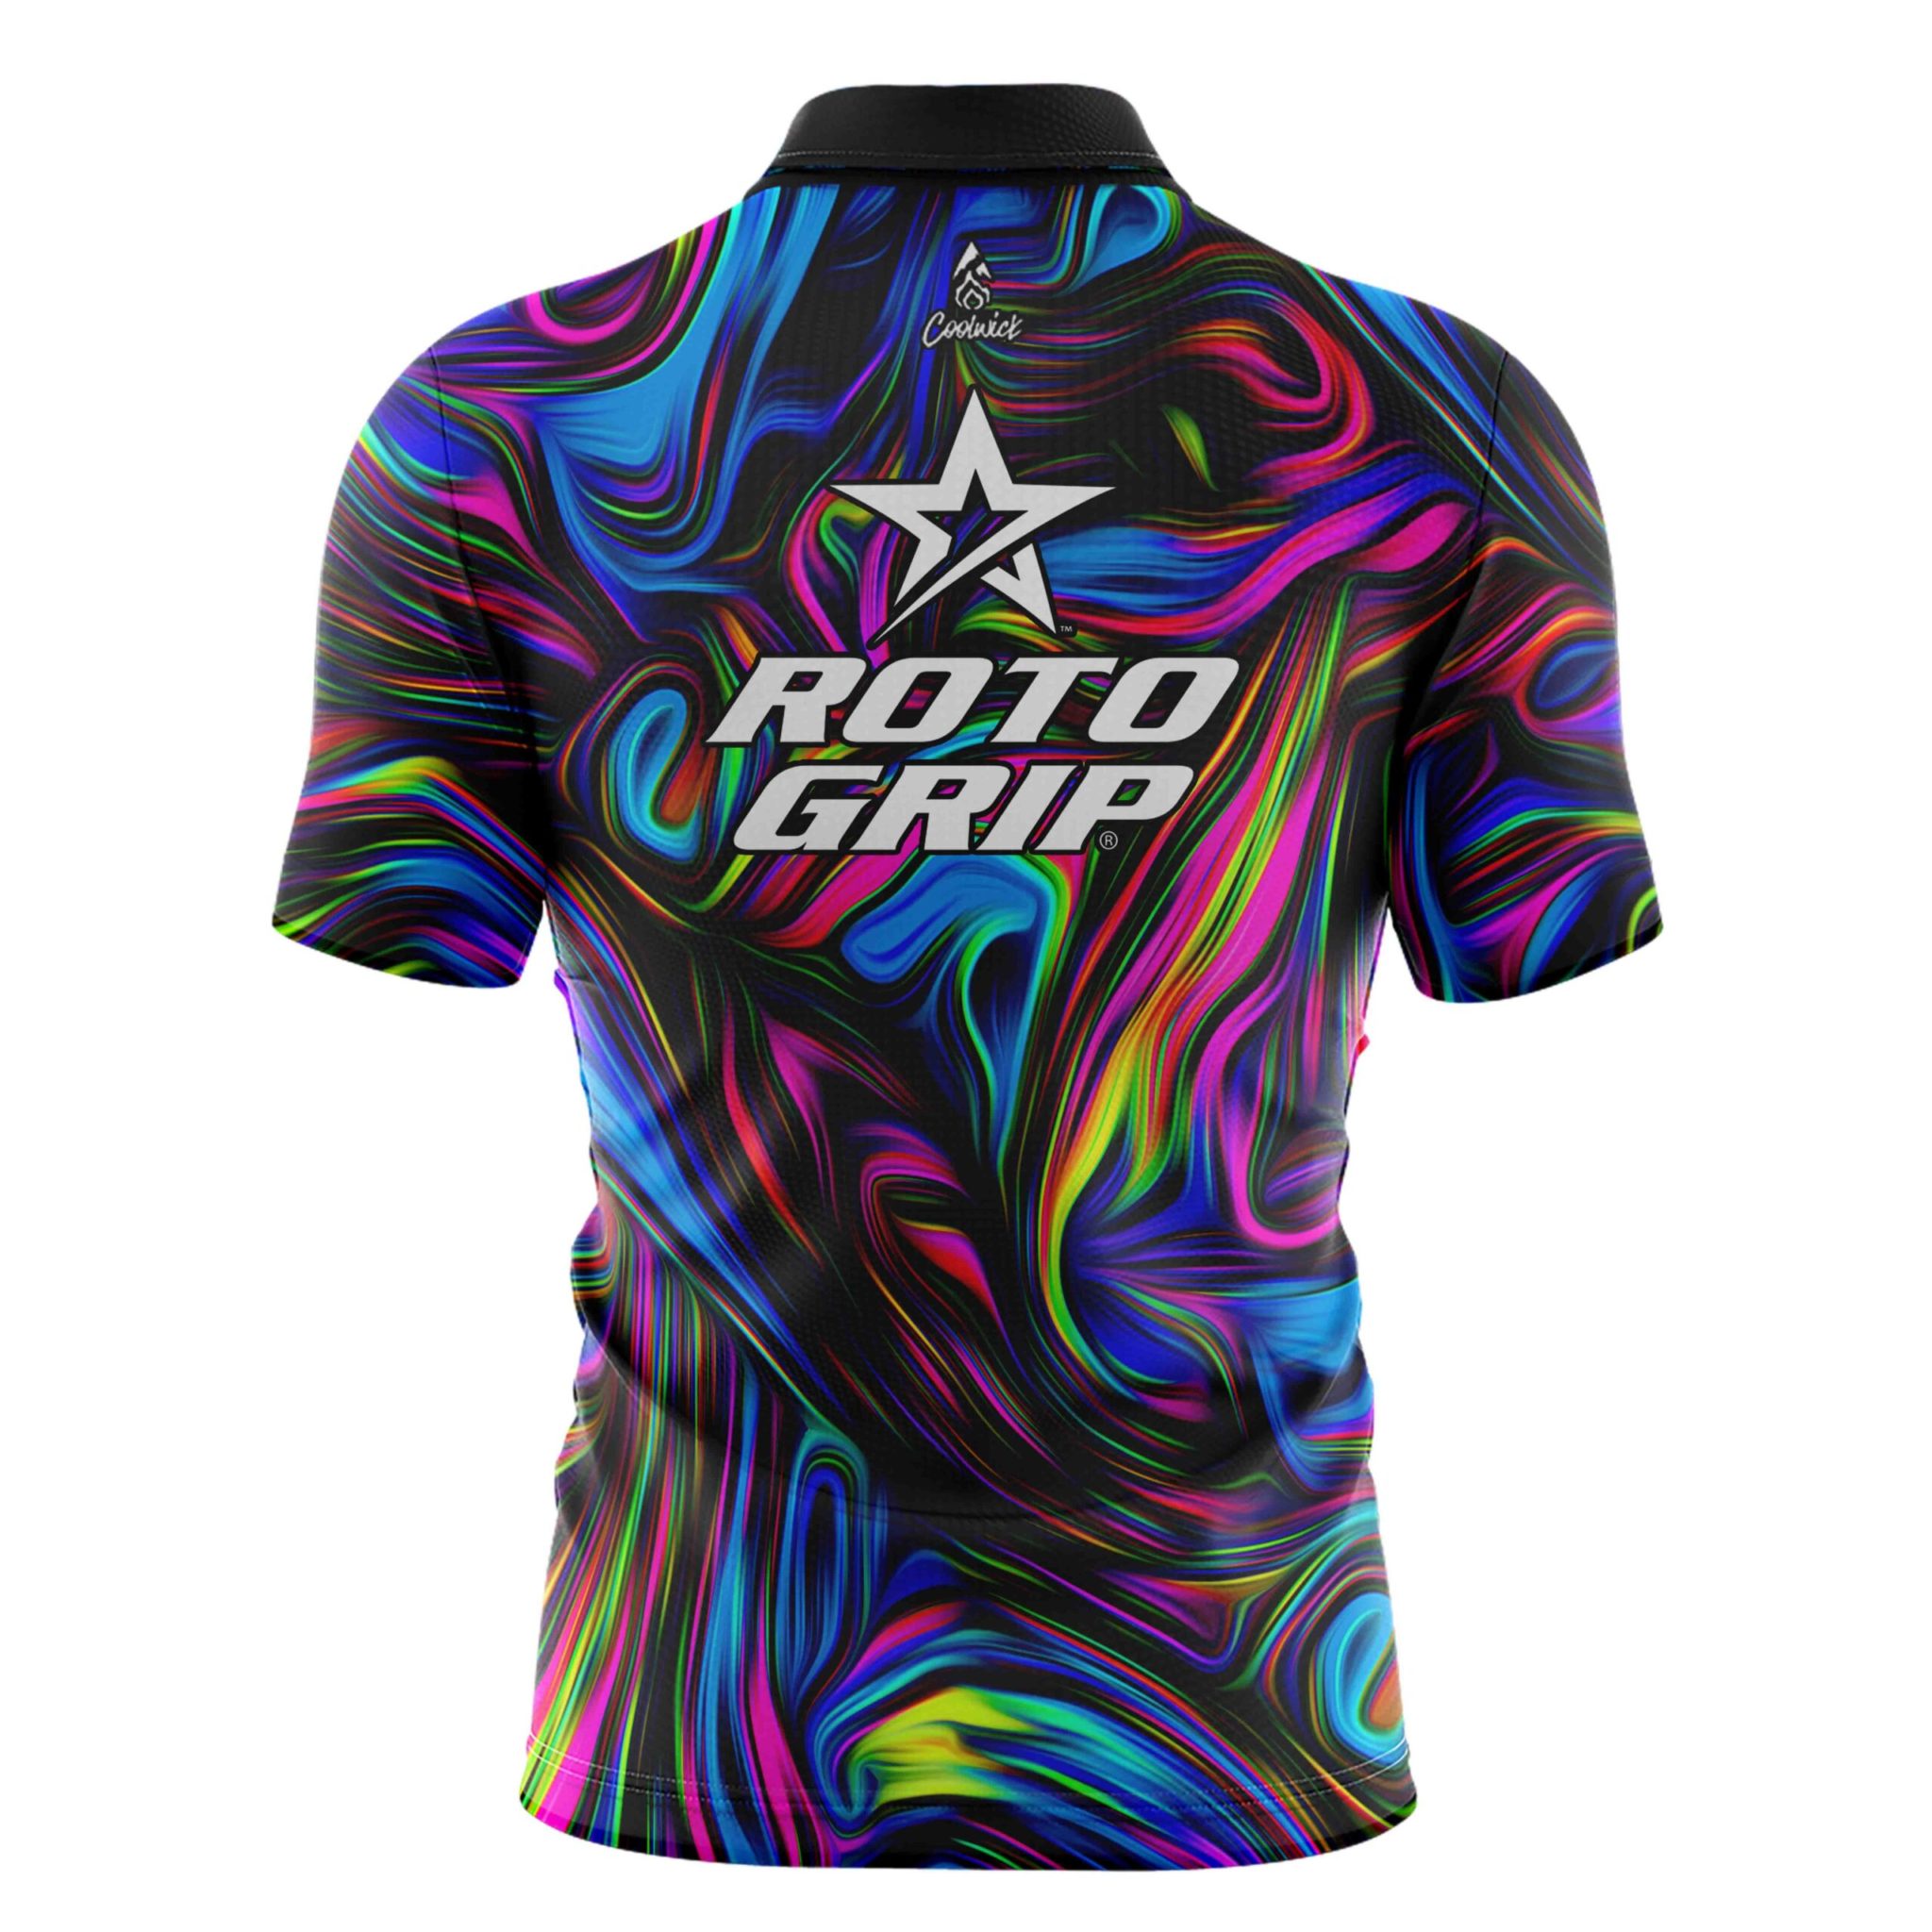 CoolWick Roto Grip Super Hero 6 Bowling Jersey